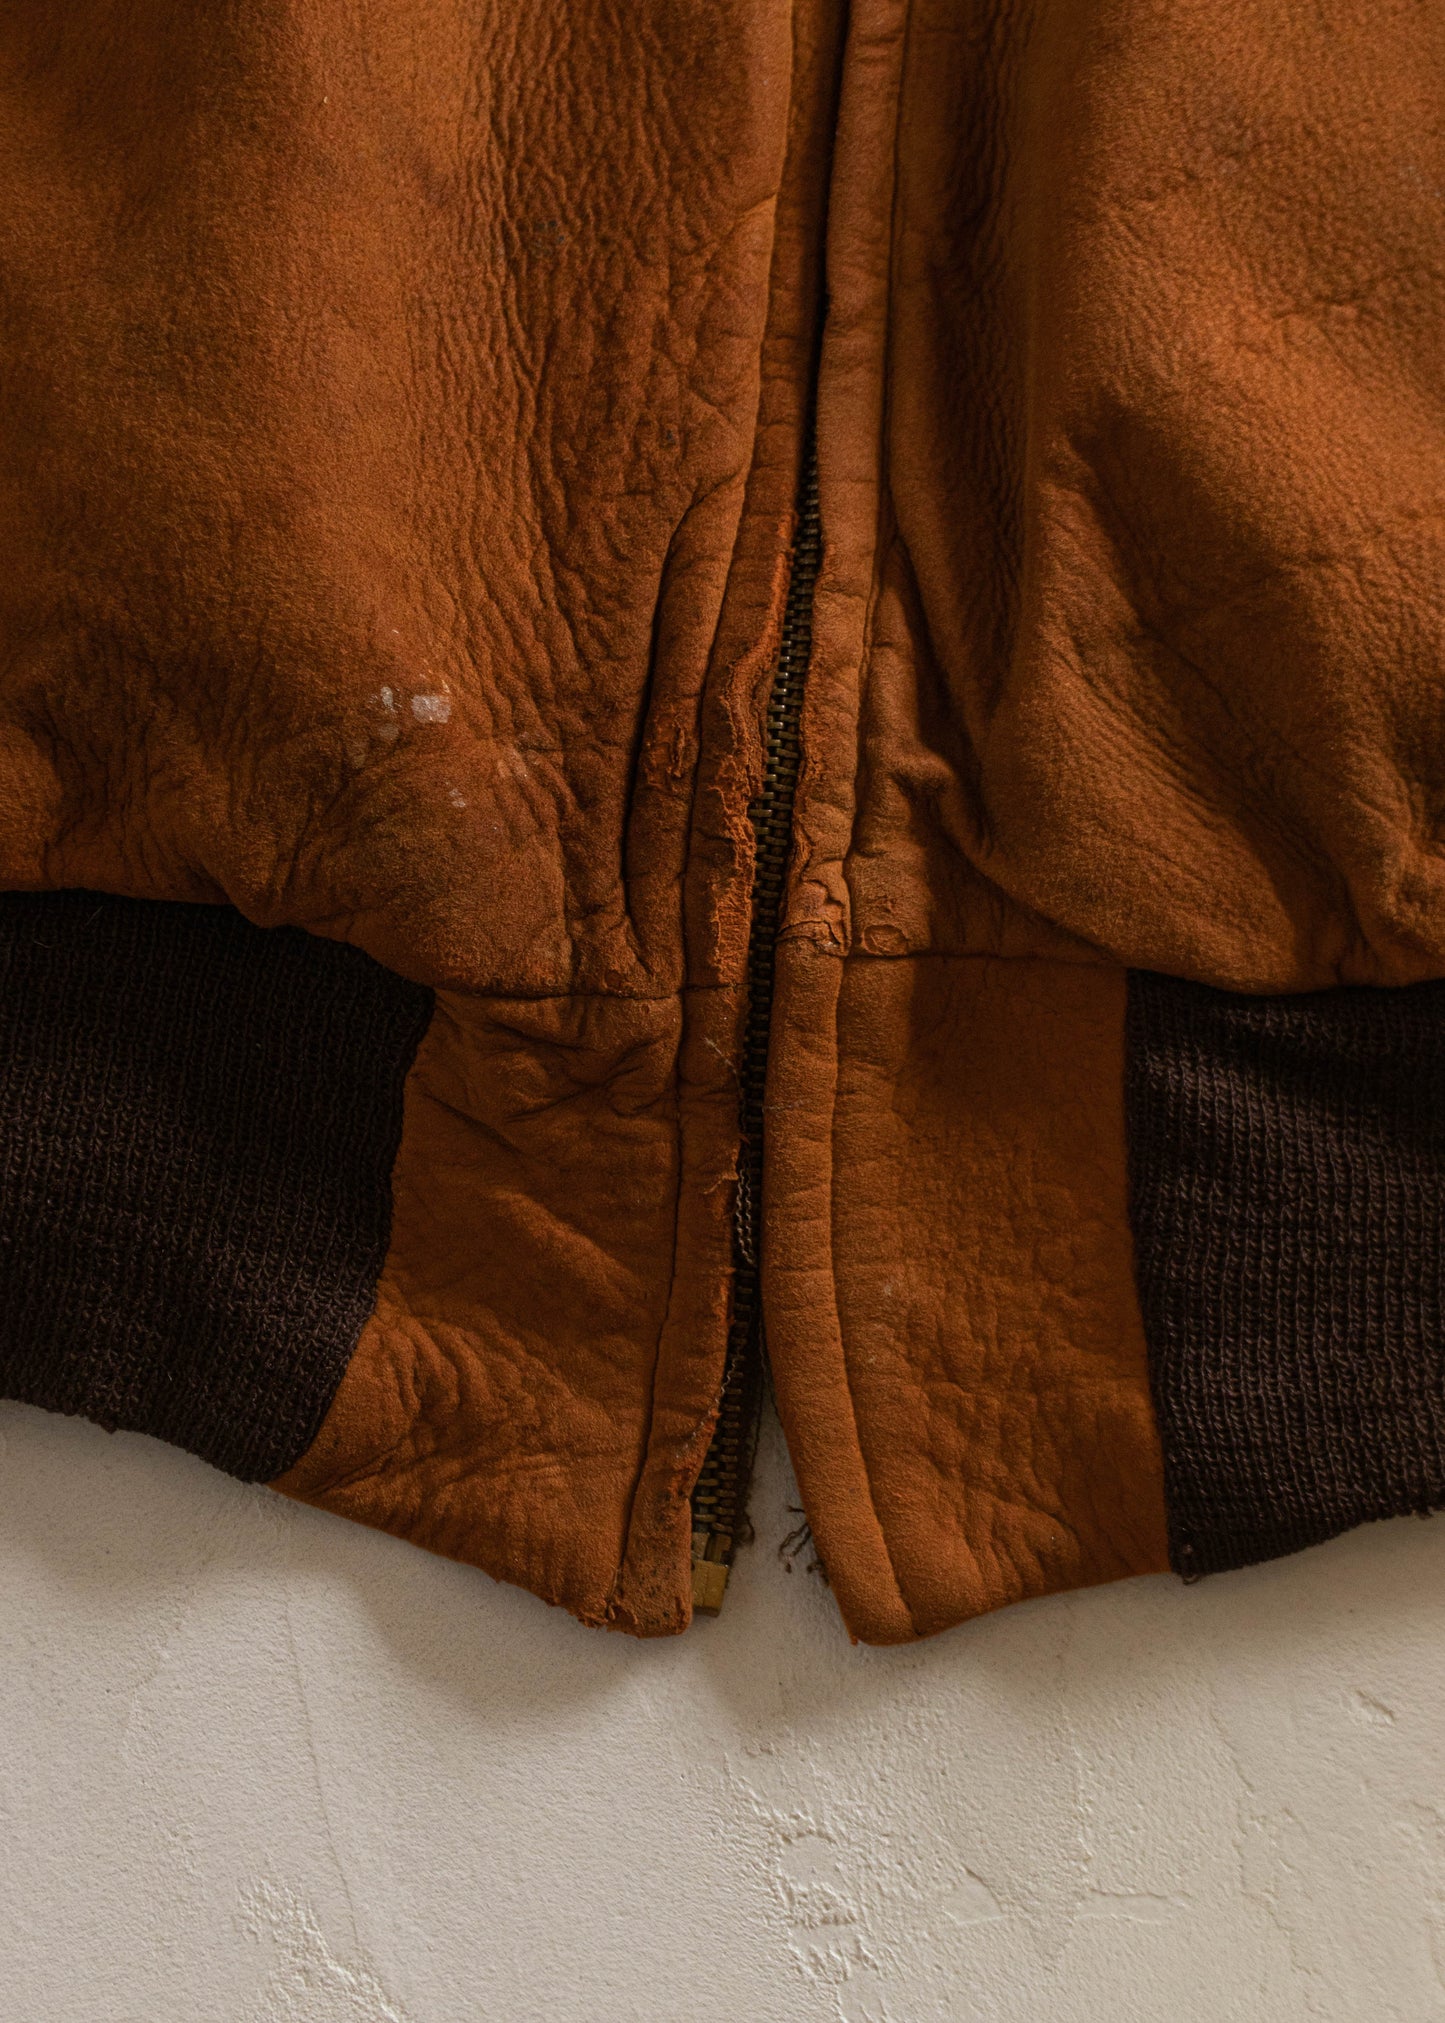 1980s Suede Bomber Jacket Size S/M